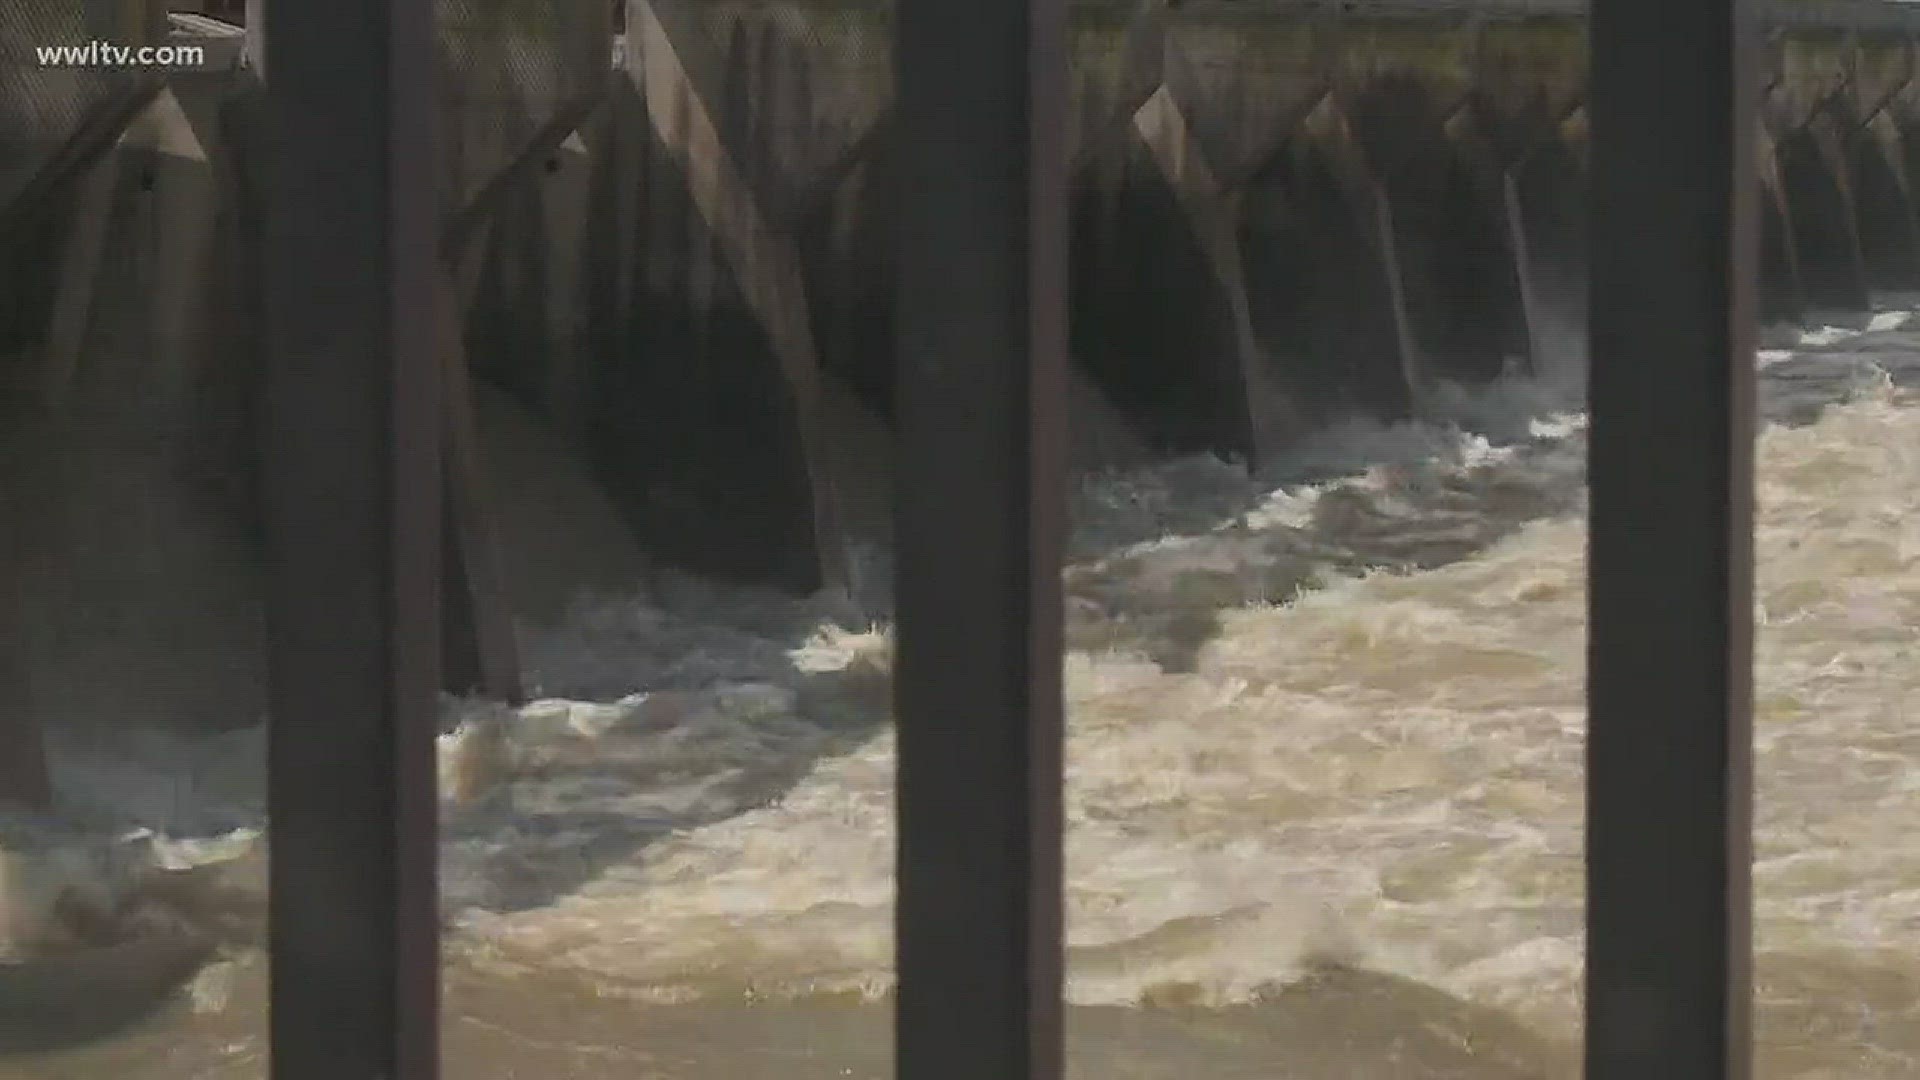 So far, 183 of the 350 bays on the mile-wide Spillway are open.